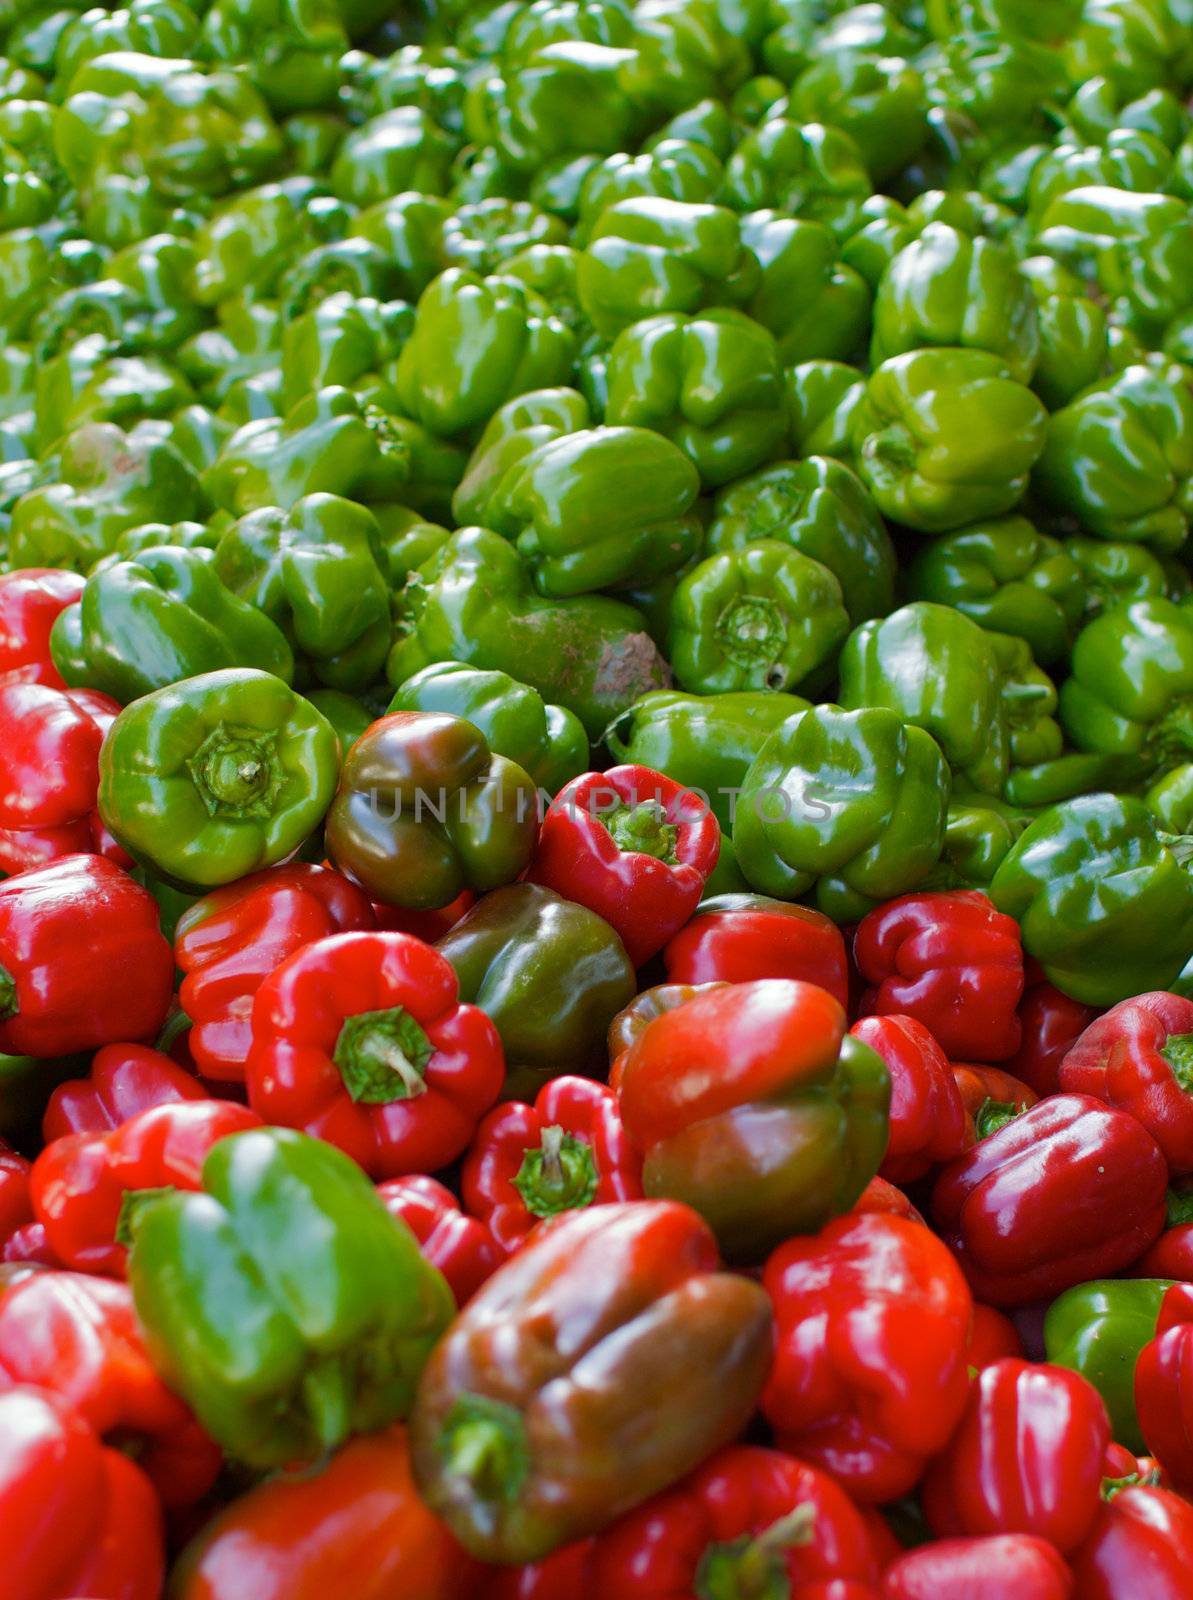 Red and green peppers in a big pile at the farmers market